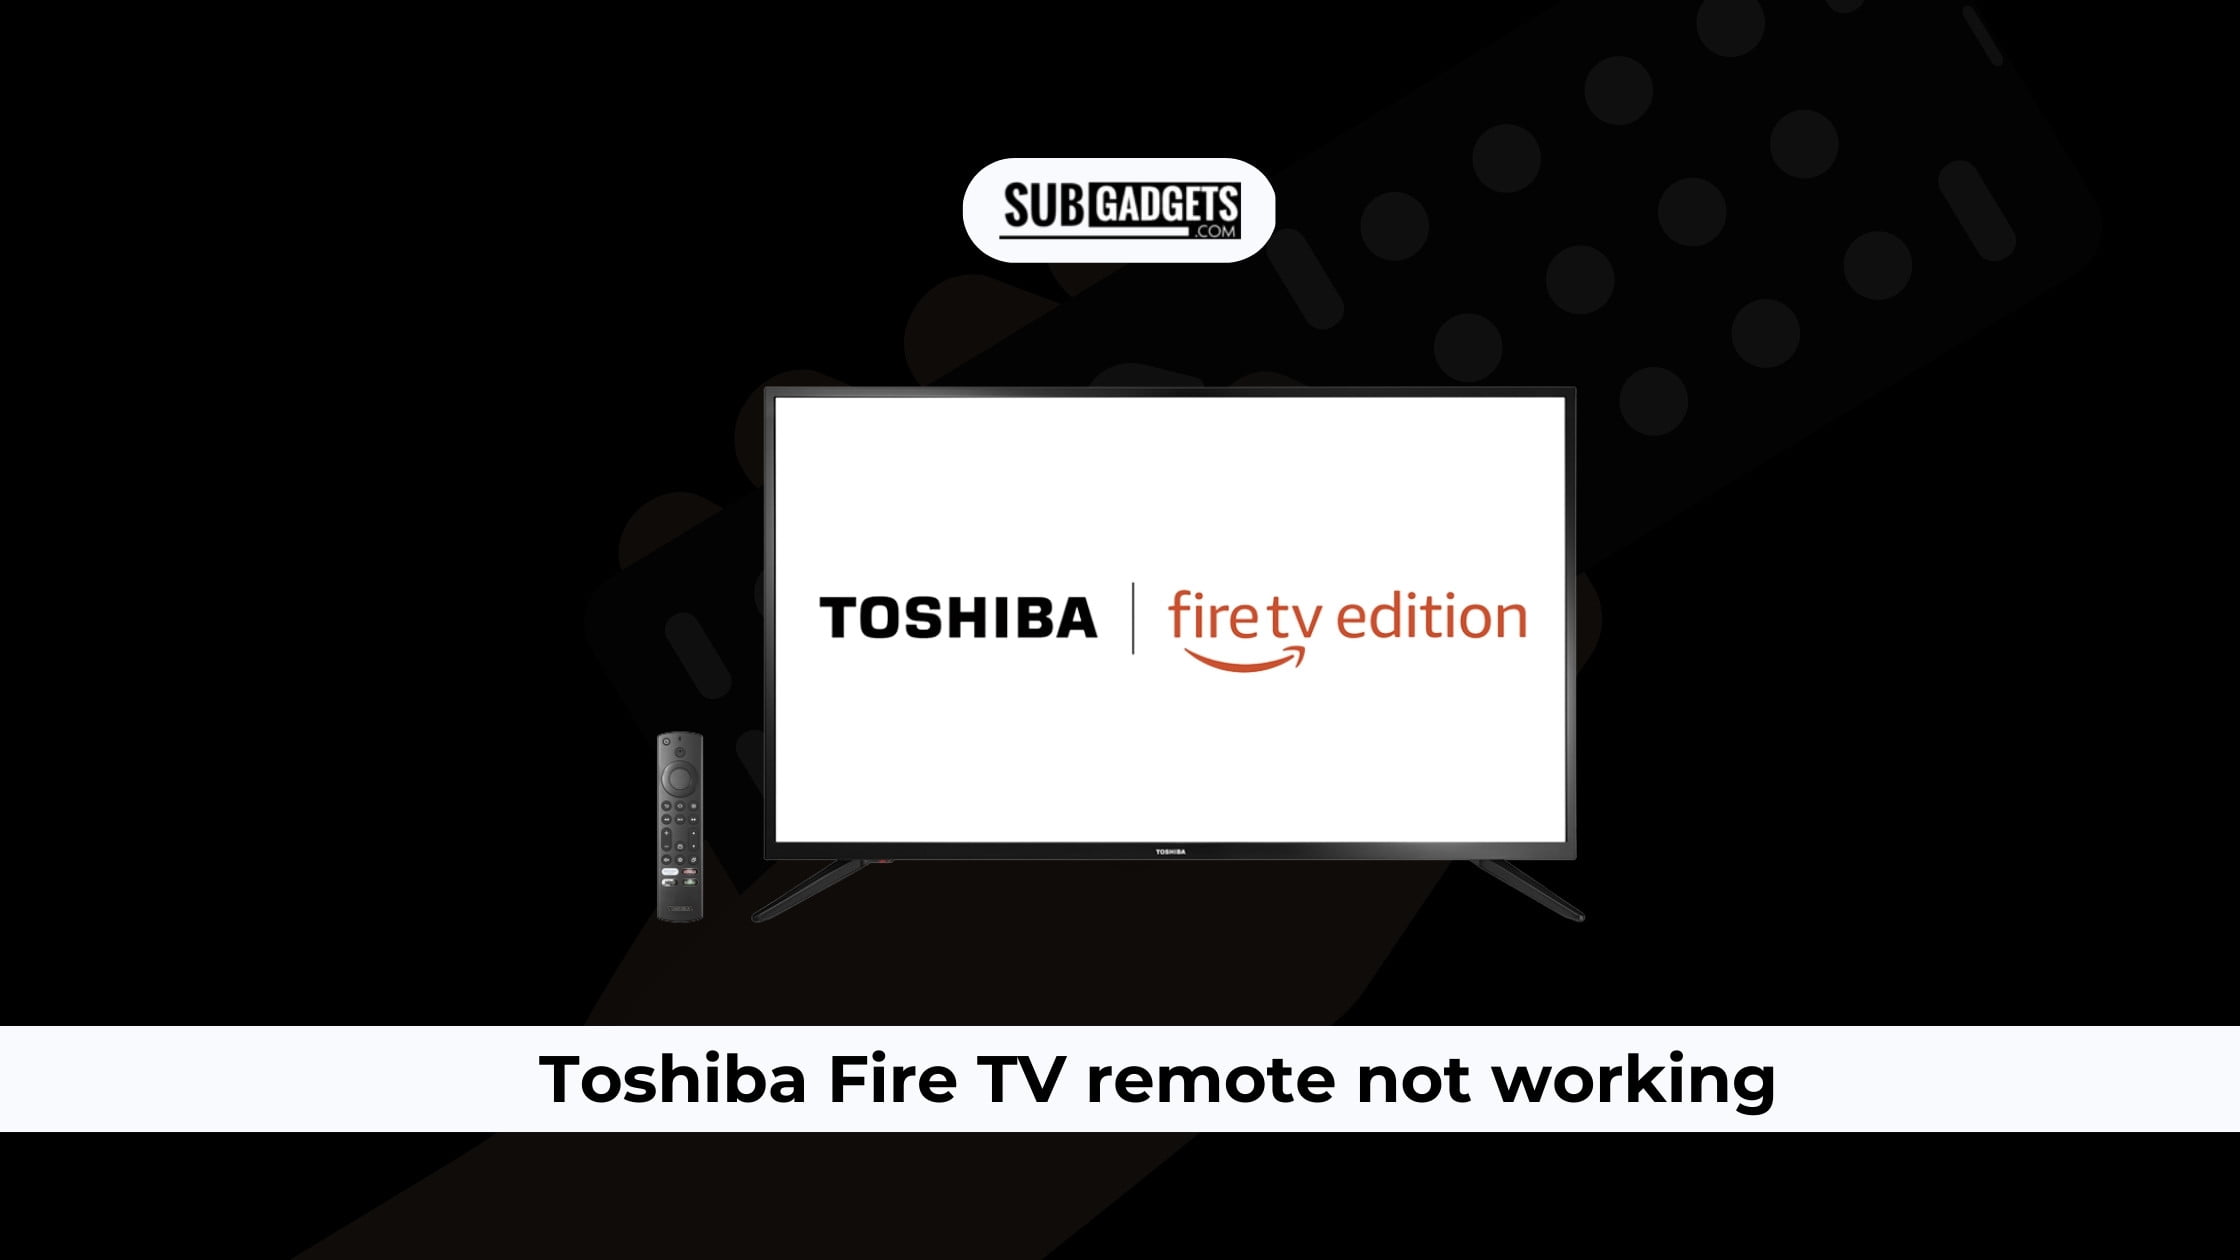 Toshiba Fire TV remote not working